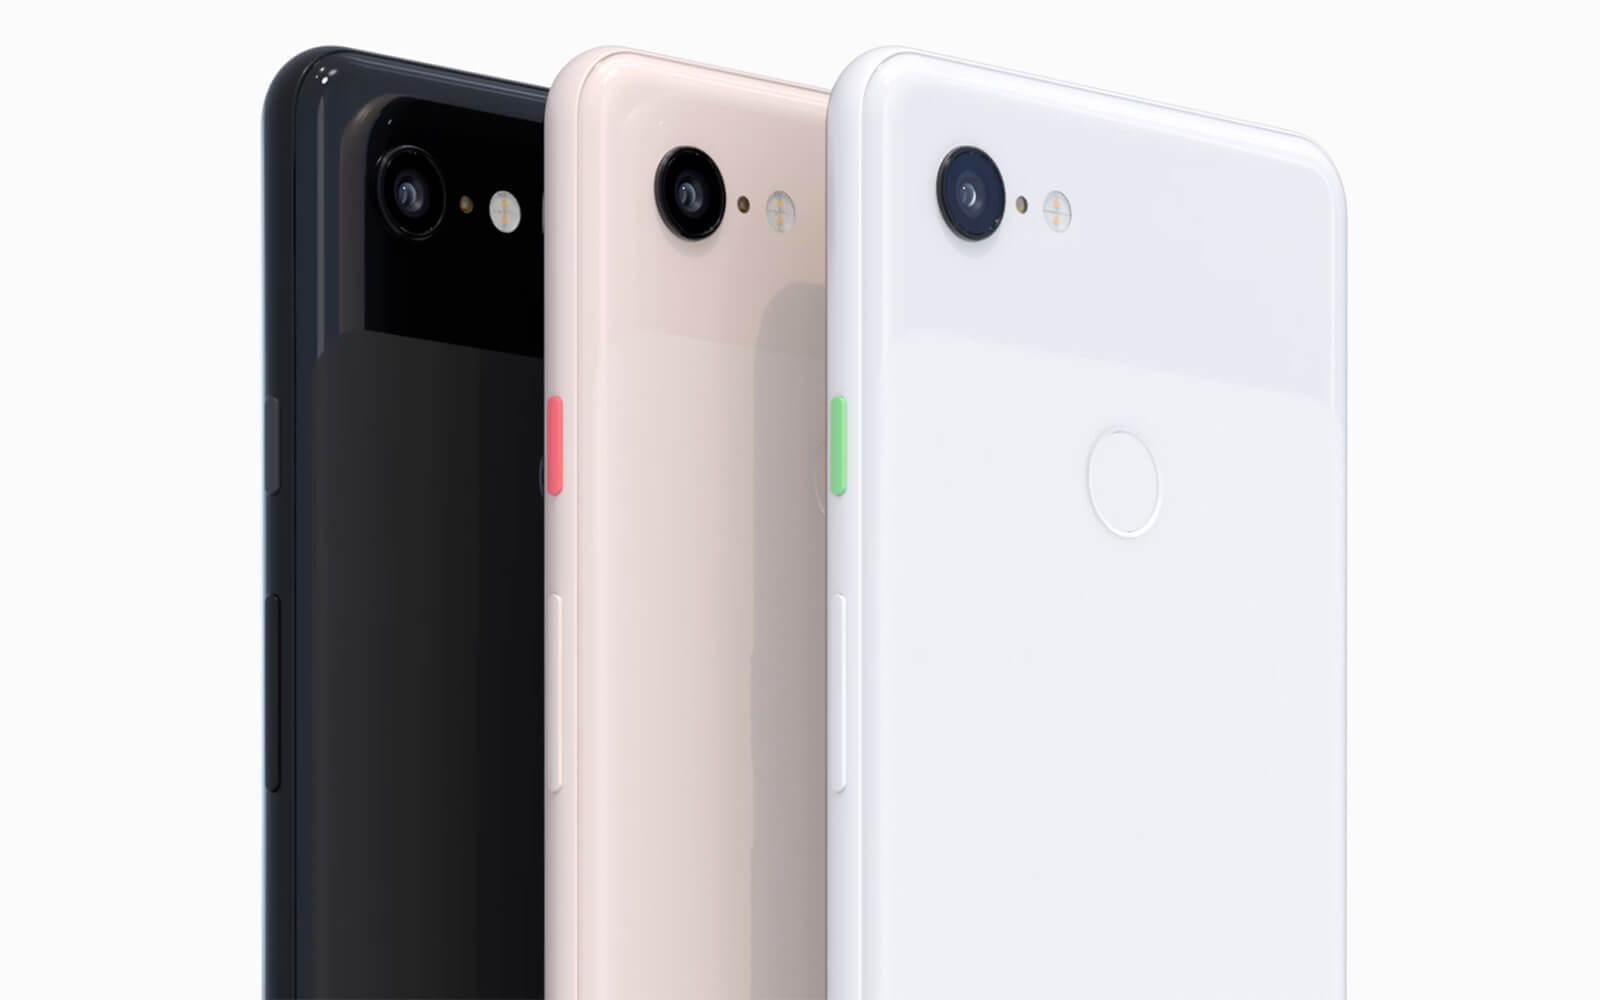 Google Pixel 3 pre-orders already have delayed arrival dates